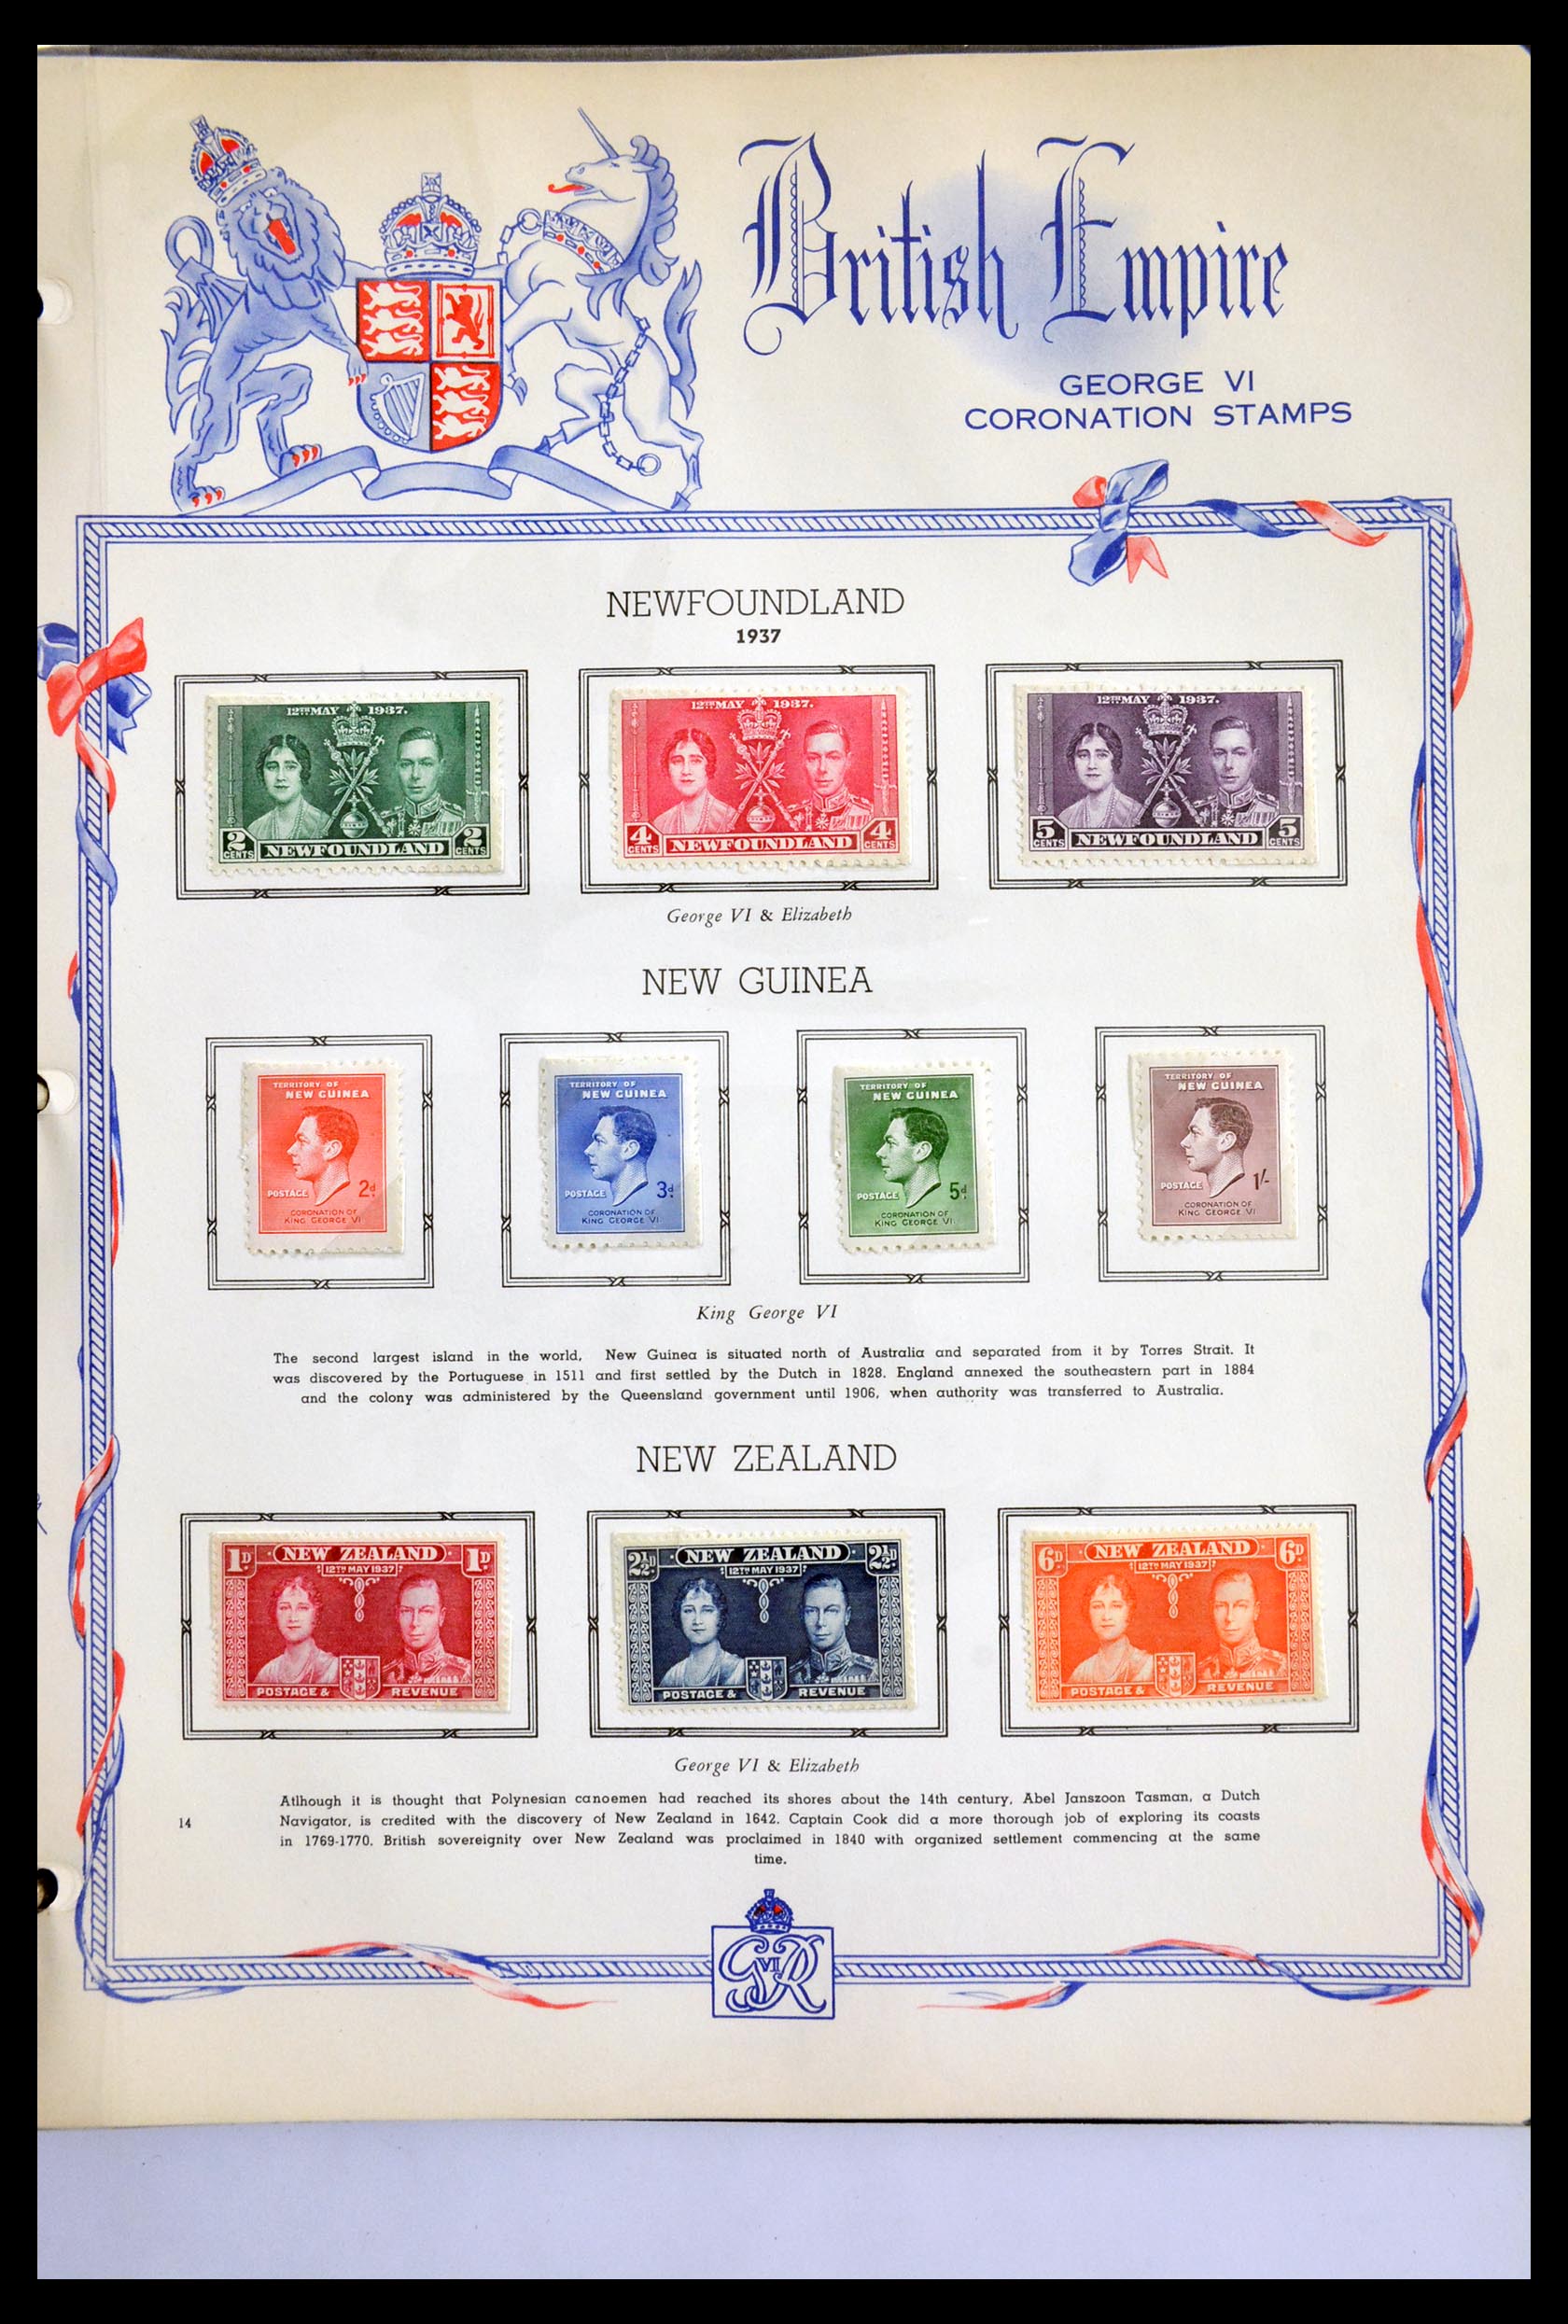 29940 014 - 29940 Great Britain and Colonies 1920-1970.